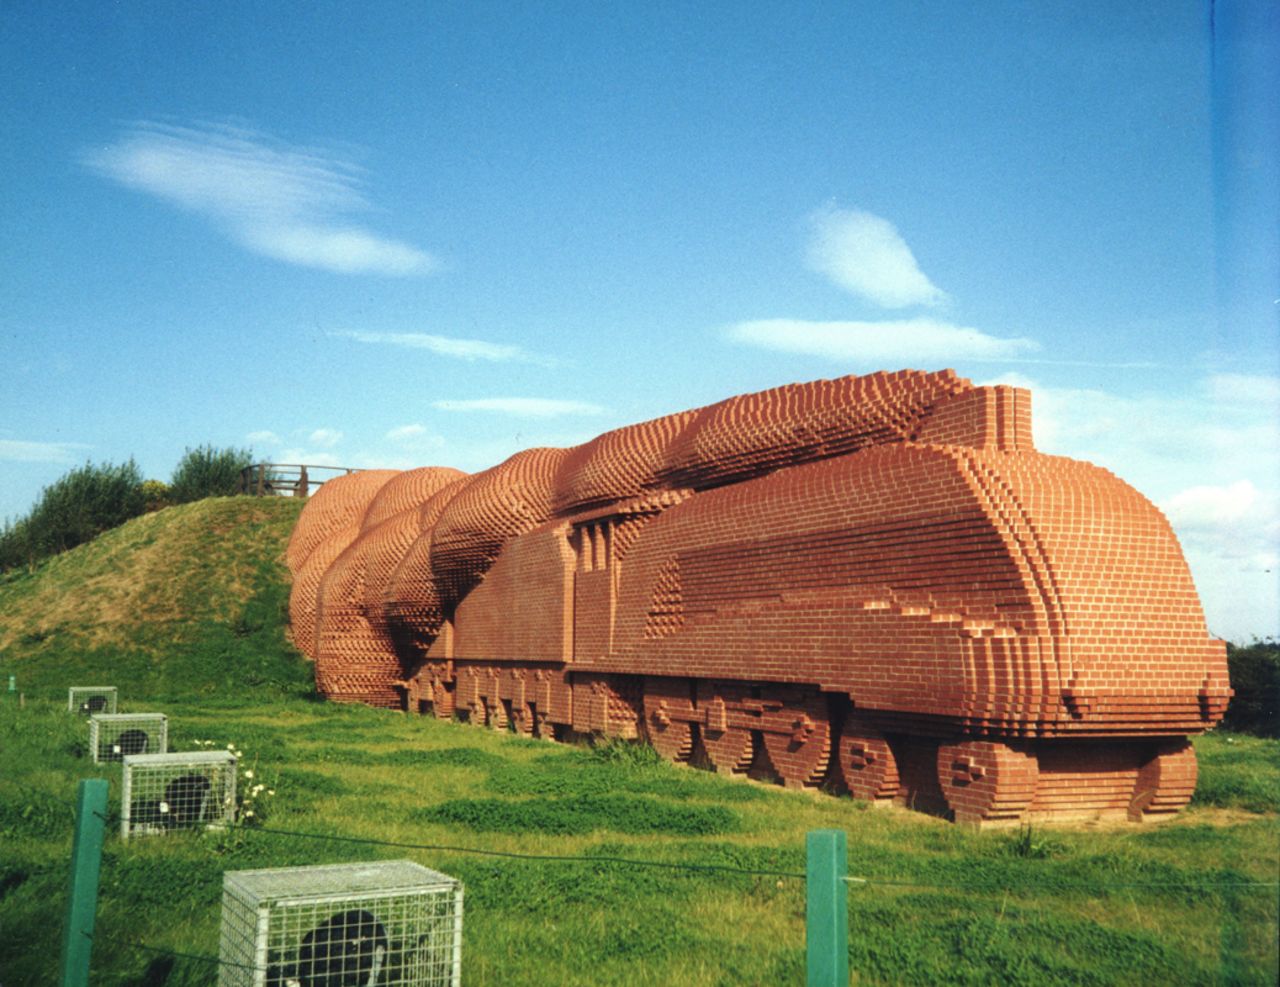 In 1997 he made a train out of 185,000 bricks, weighing 15,000 tons, coming out of a hillside near the northern English town of Darlington.